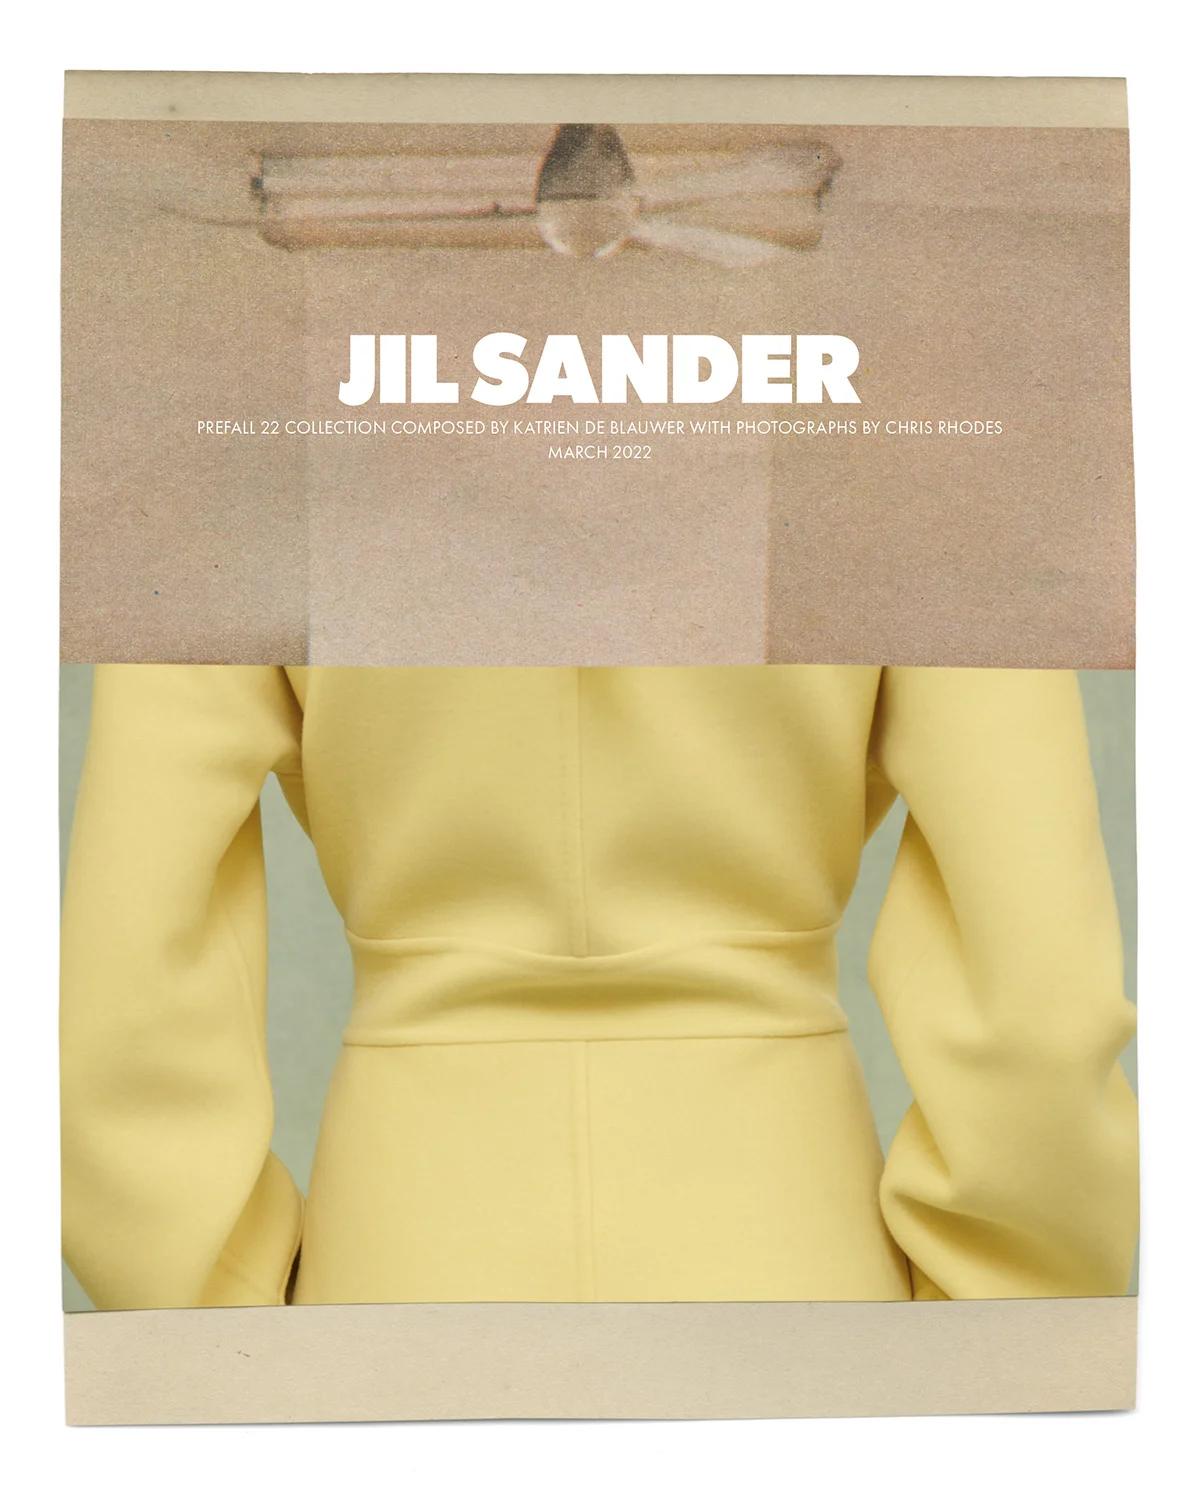 Jil Sander Pre-Fall 2022 Ad Campaign Composed by Katrien de Blauwer with Photographs by Chris Rhodes